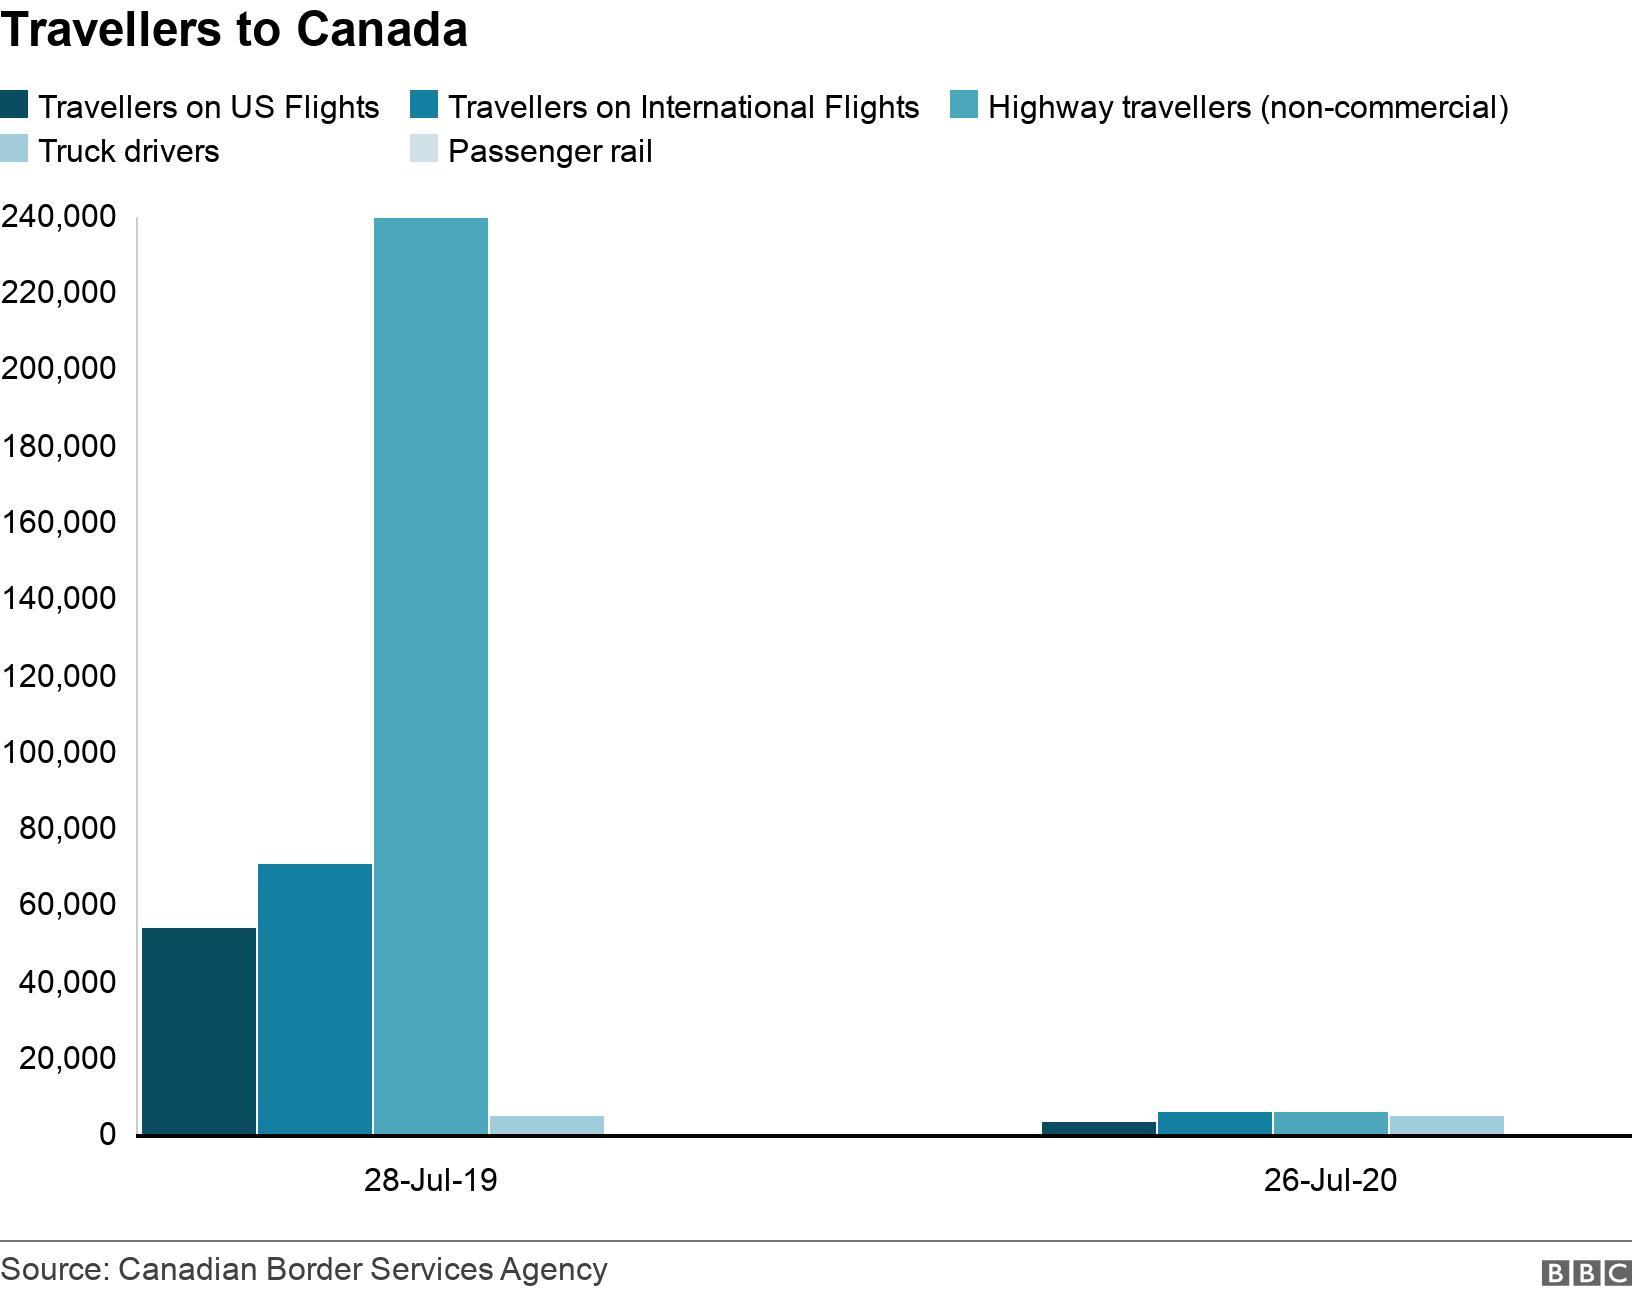 Travellers to Canada. . Travel to Canada from the US declined by about 95%, between 26 July 2020 and 28 July 2019 .